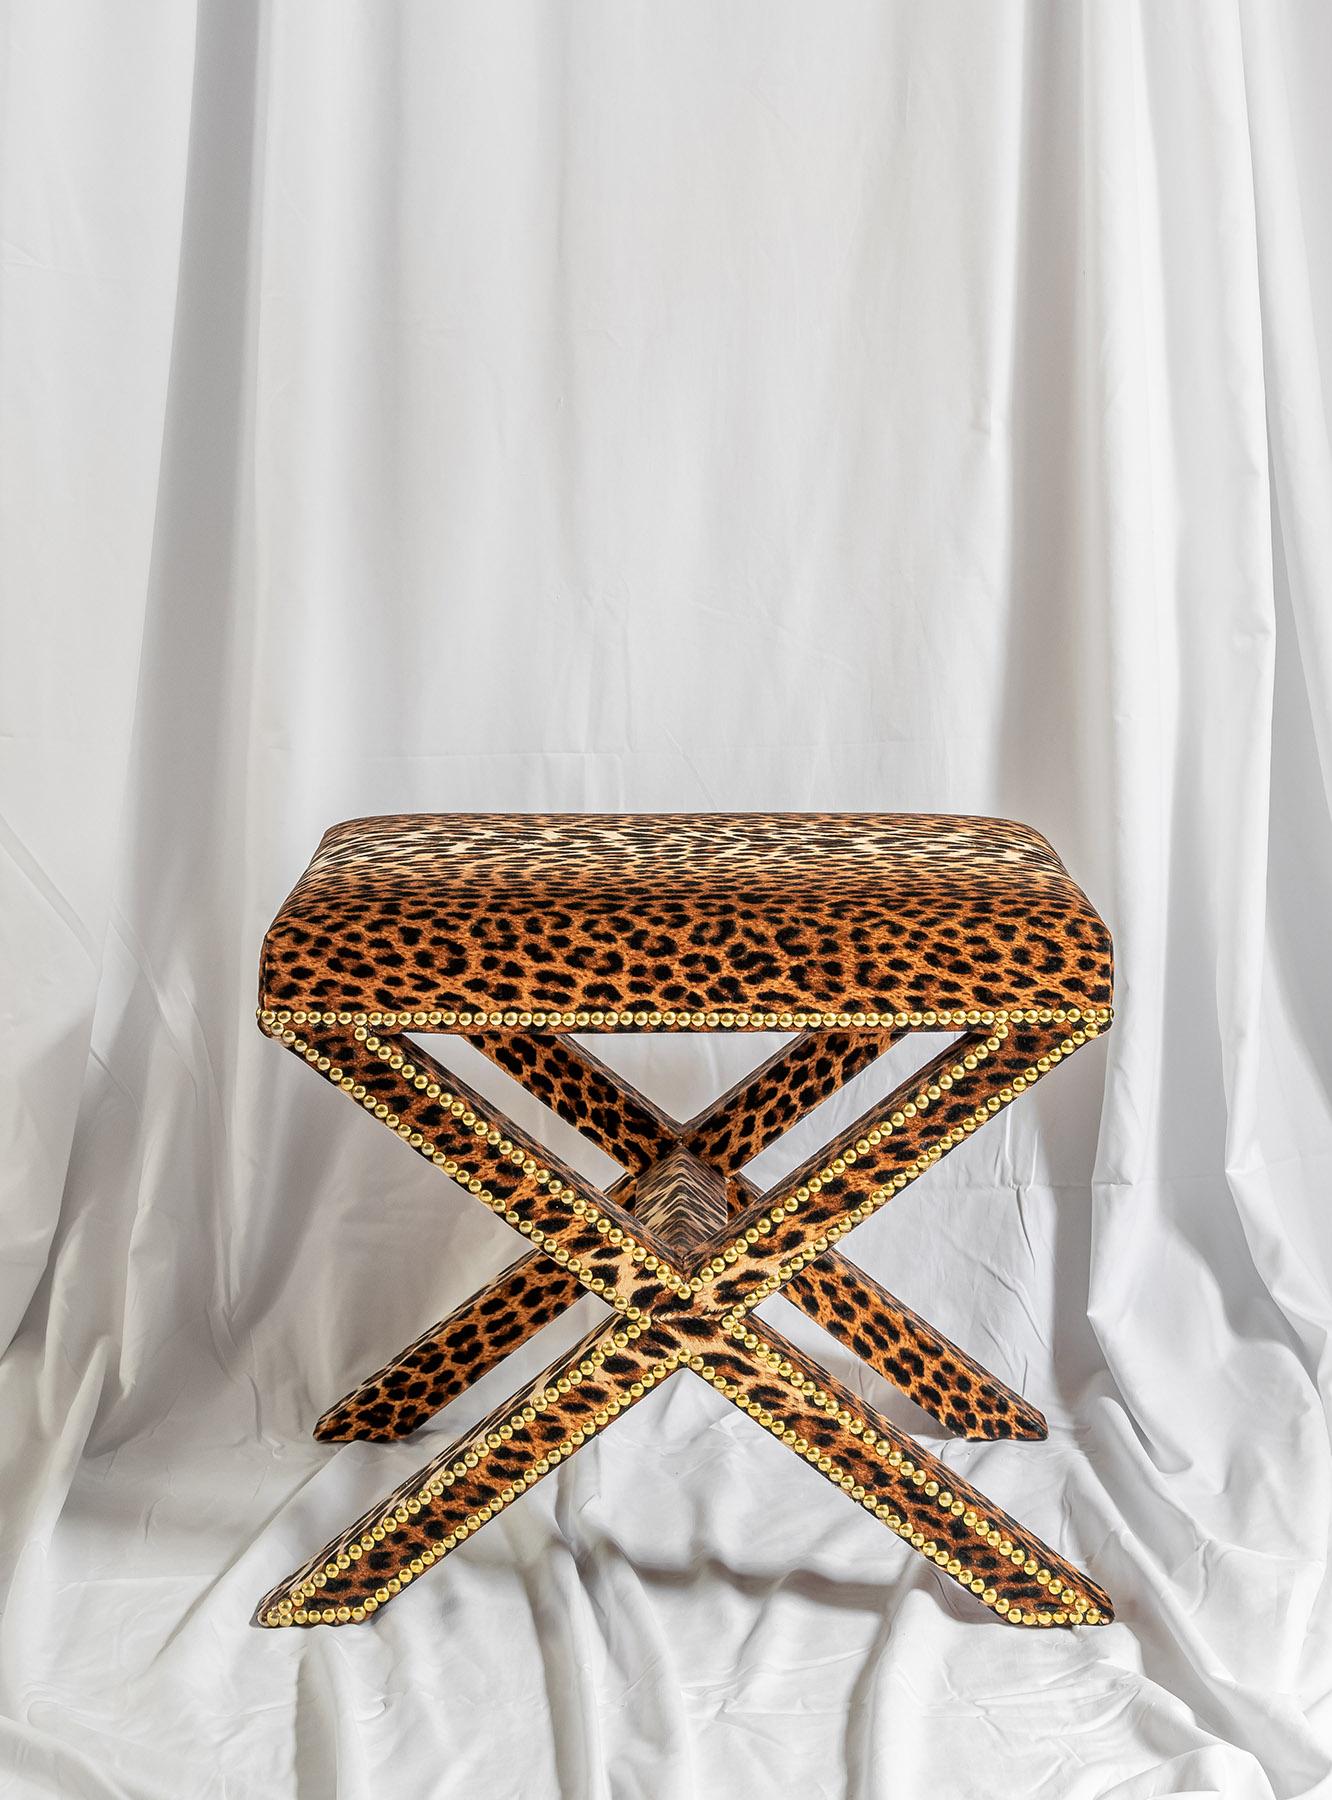 Another classically inspired piece that works in any space and particularly beautiful sitting as a pair under the Lucia console. Samantha updated the classical form of an X-frame giving it trim proportions, a generous seat pad and stud detailing. In